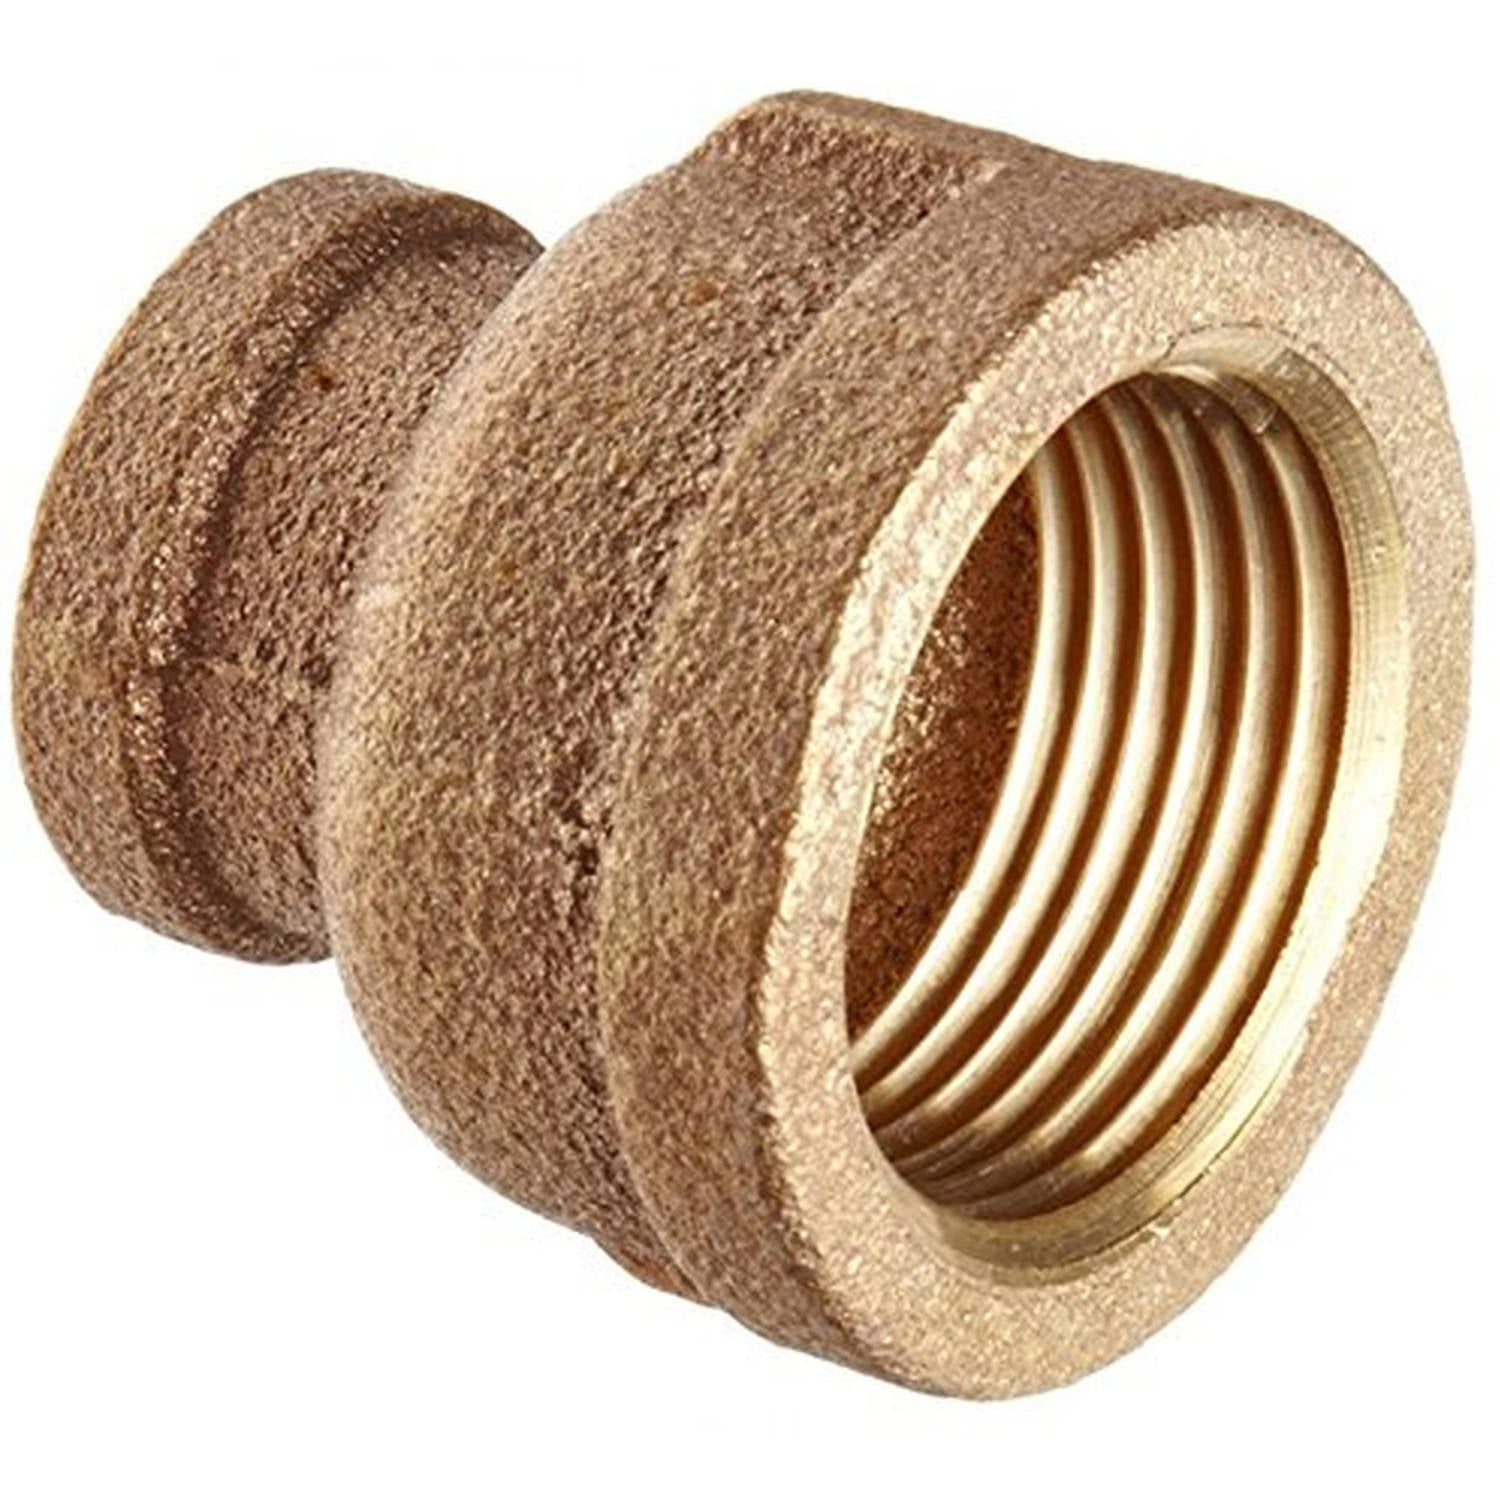 Everflow 1-1/4 x 1 Inch Lead Free Brass Reducing Coupling With Female Threaded 